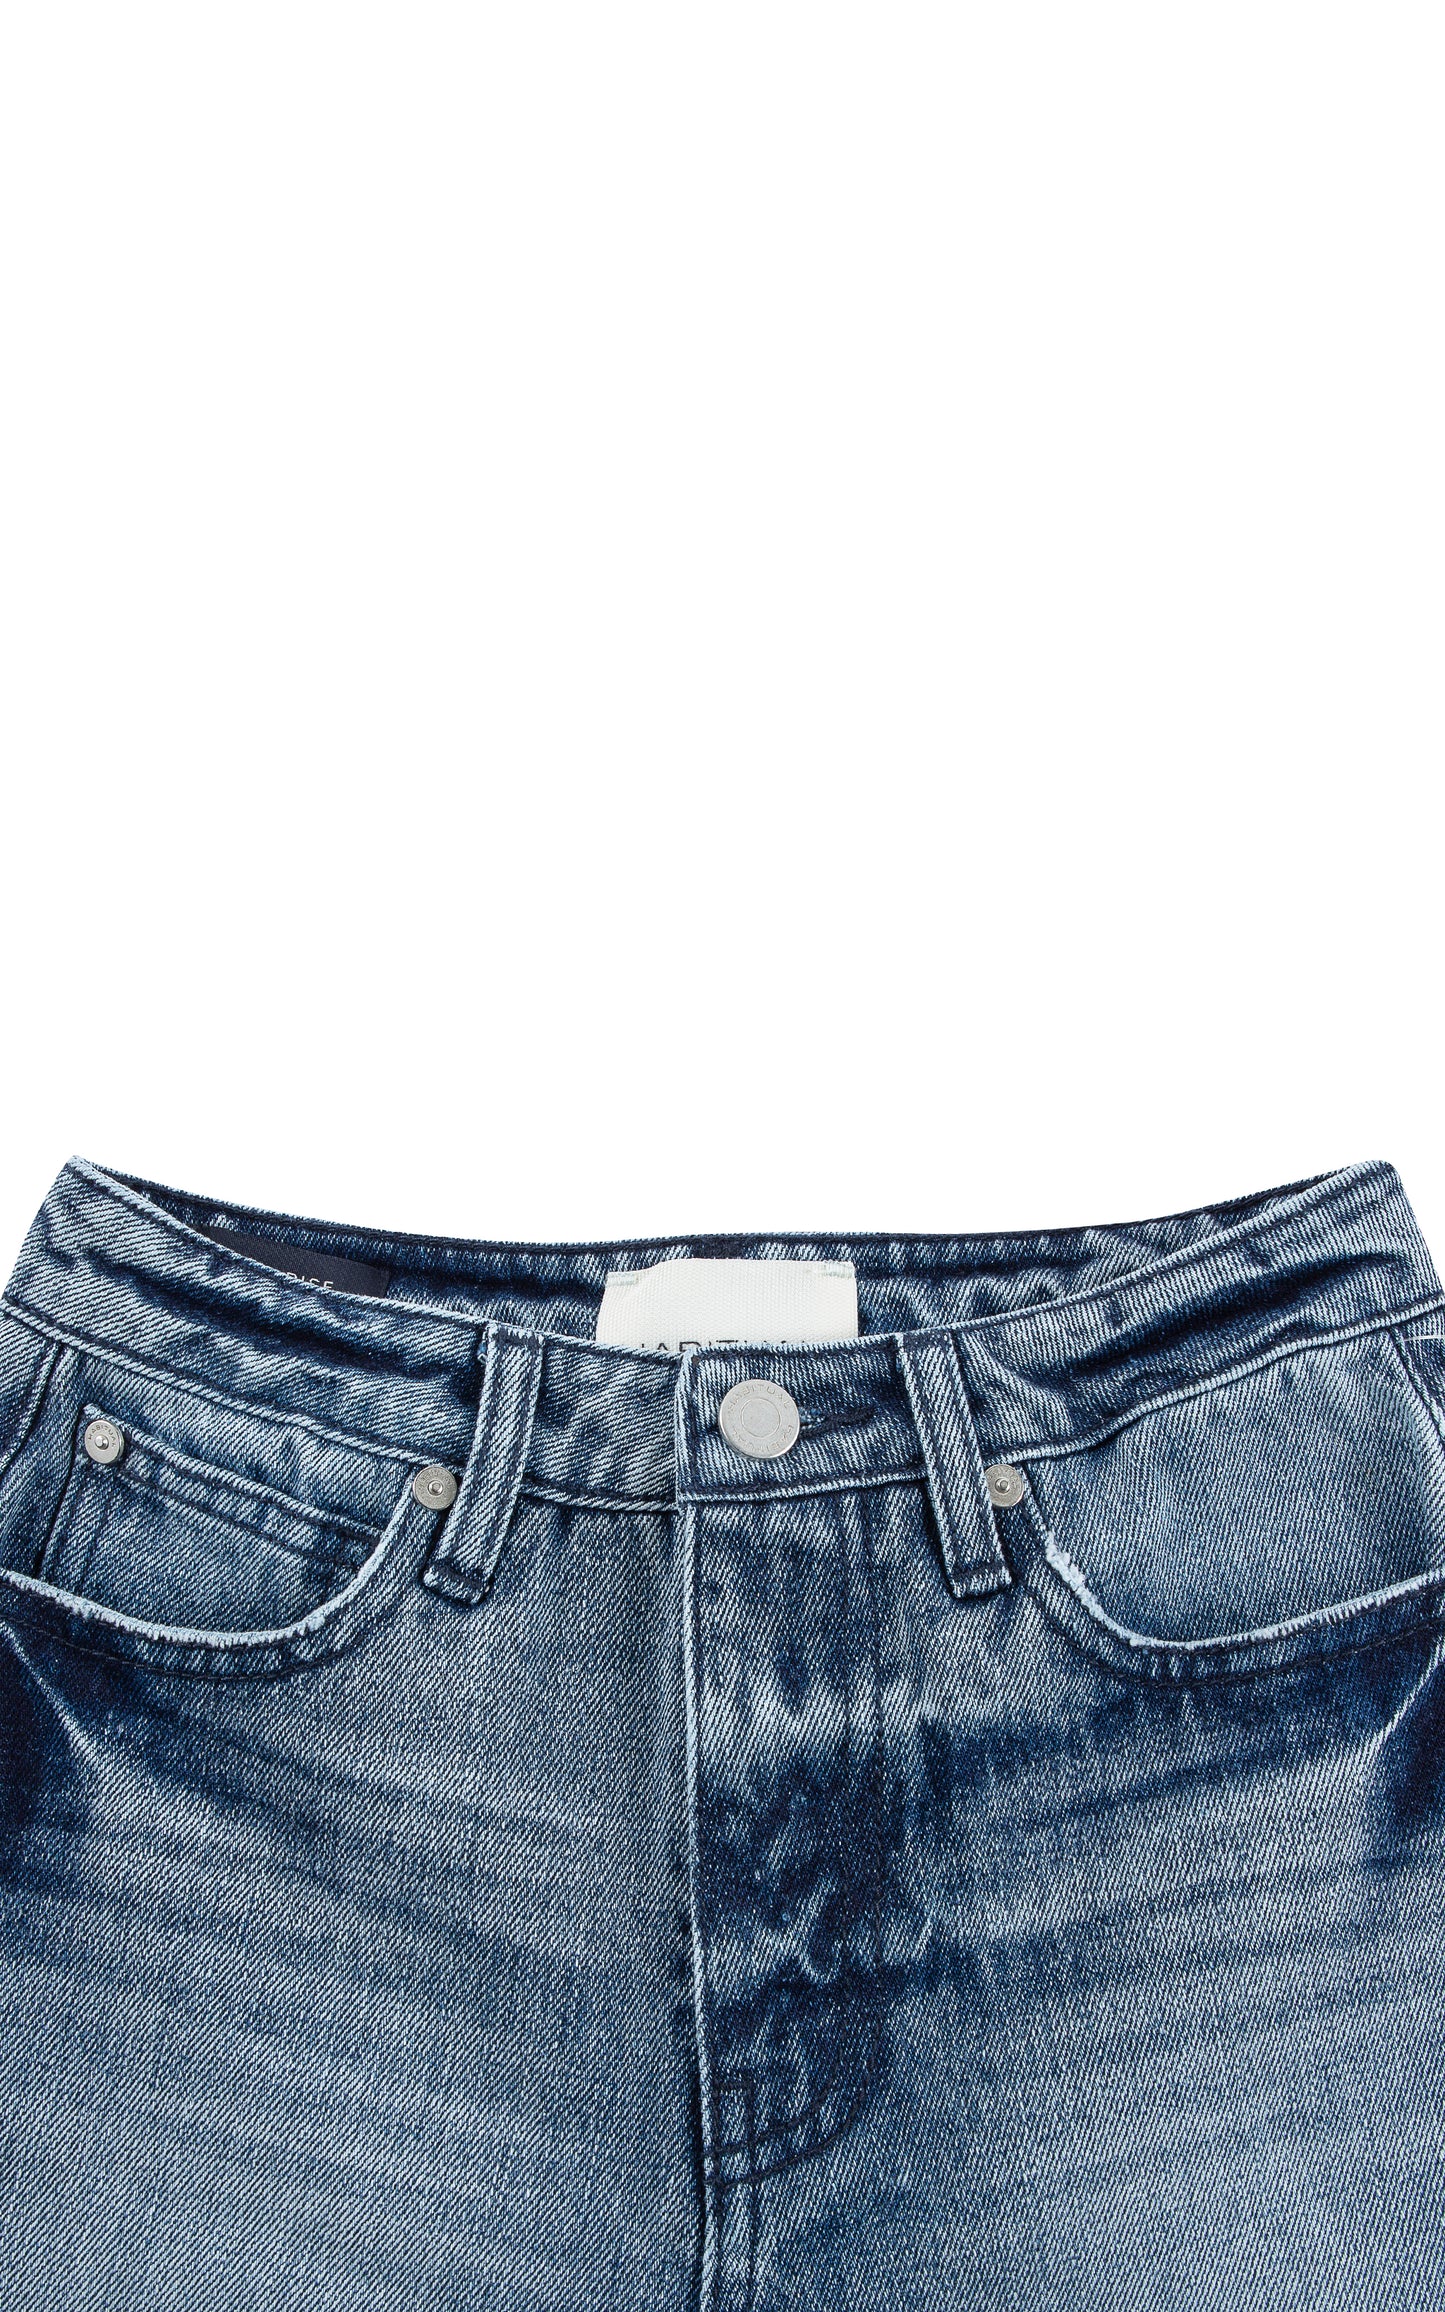 Close up of denim shorts with blue-and-white striped exposed pockets